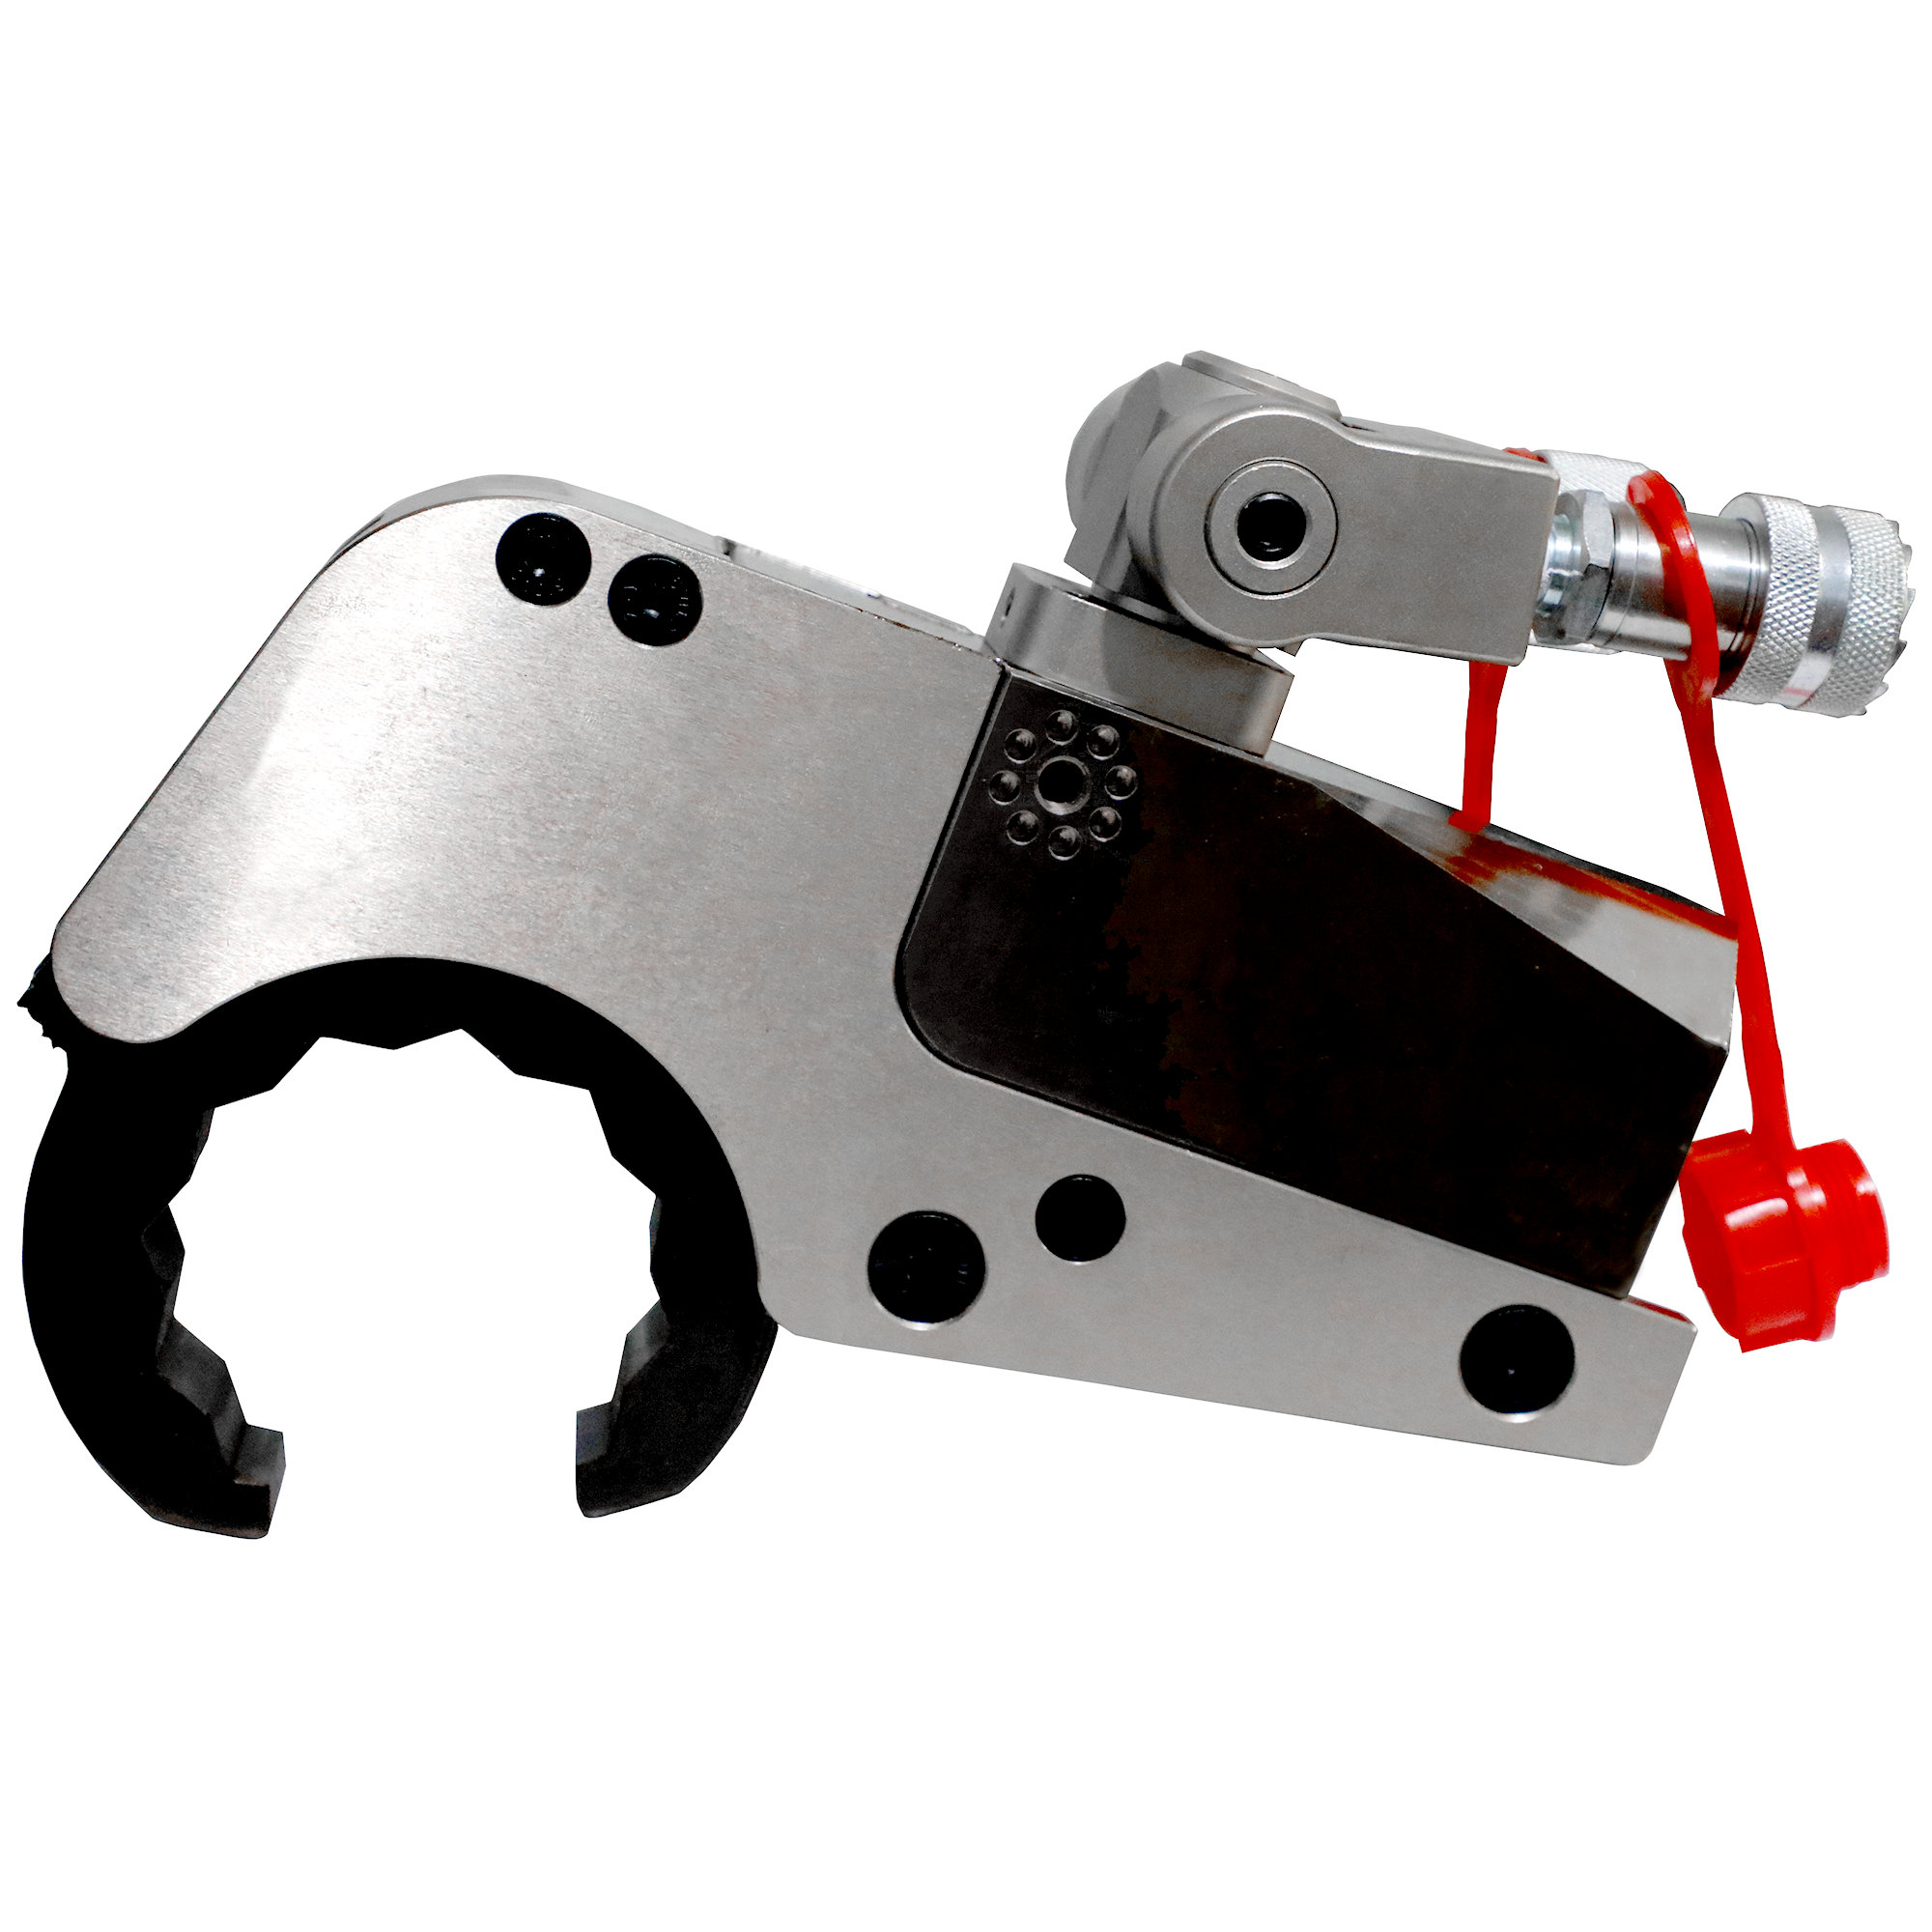 MGHT Serial Low Profile Hydraulic Torque Wrench